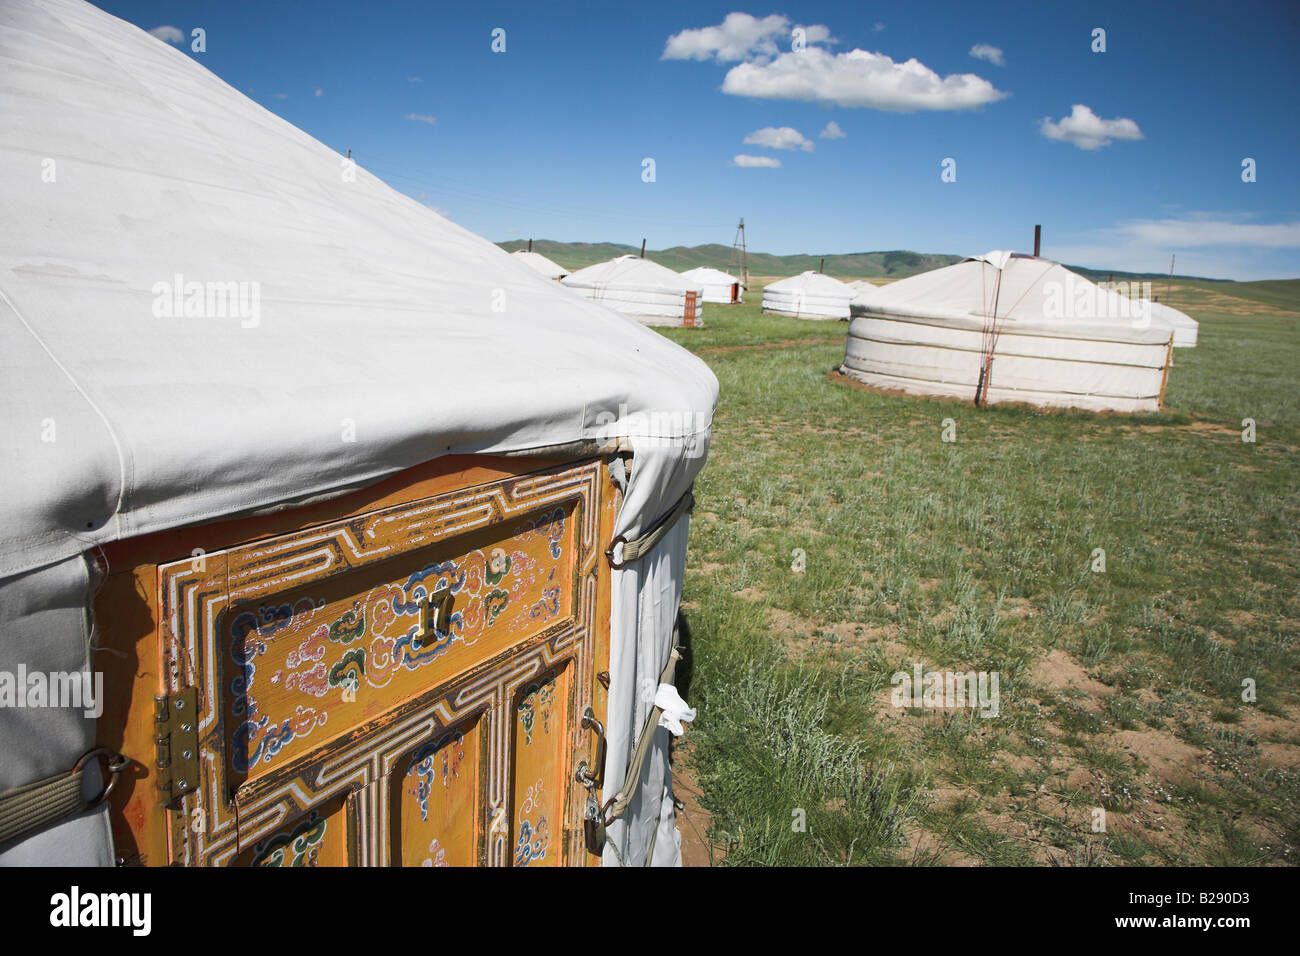 A traditional Ger tent in Elstei near Ulaan Baatar Mongolia Stock Photo